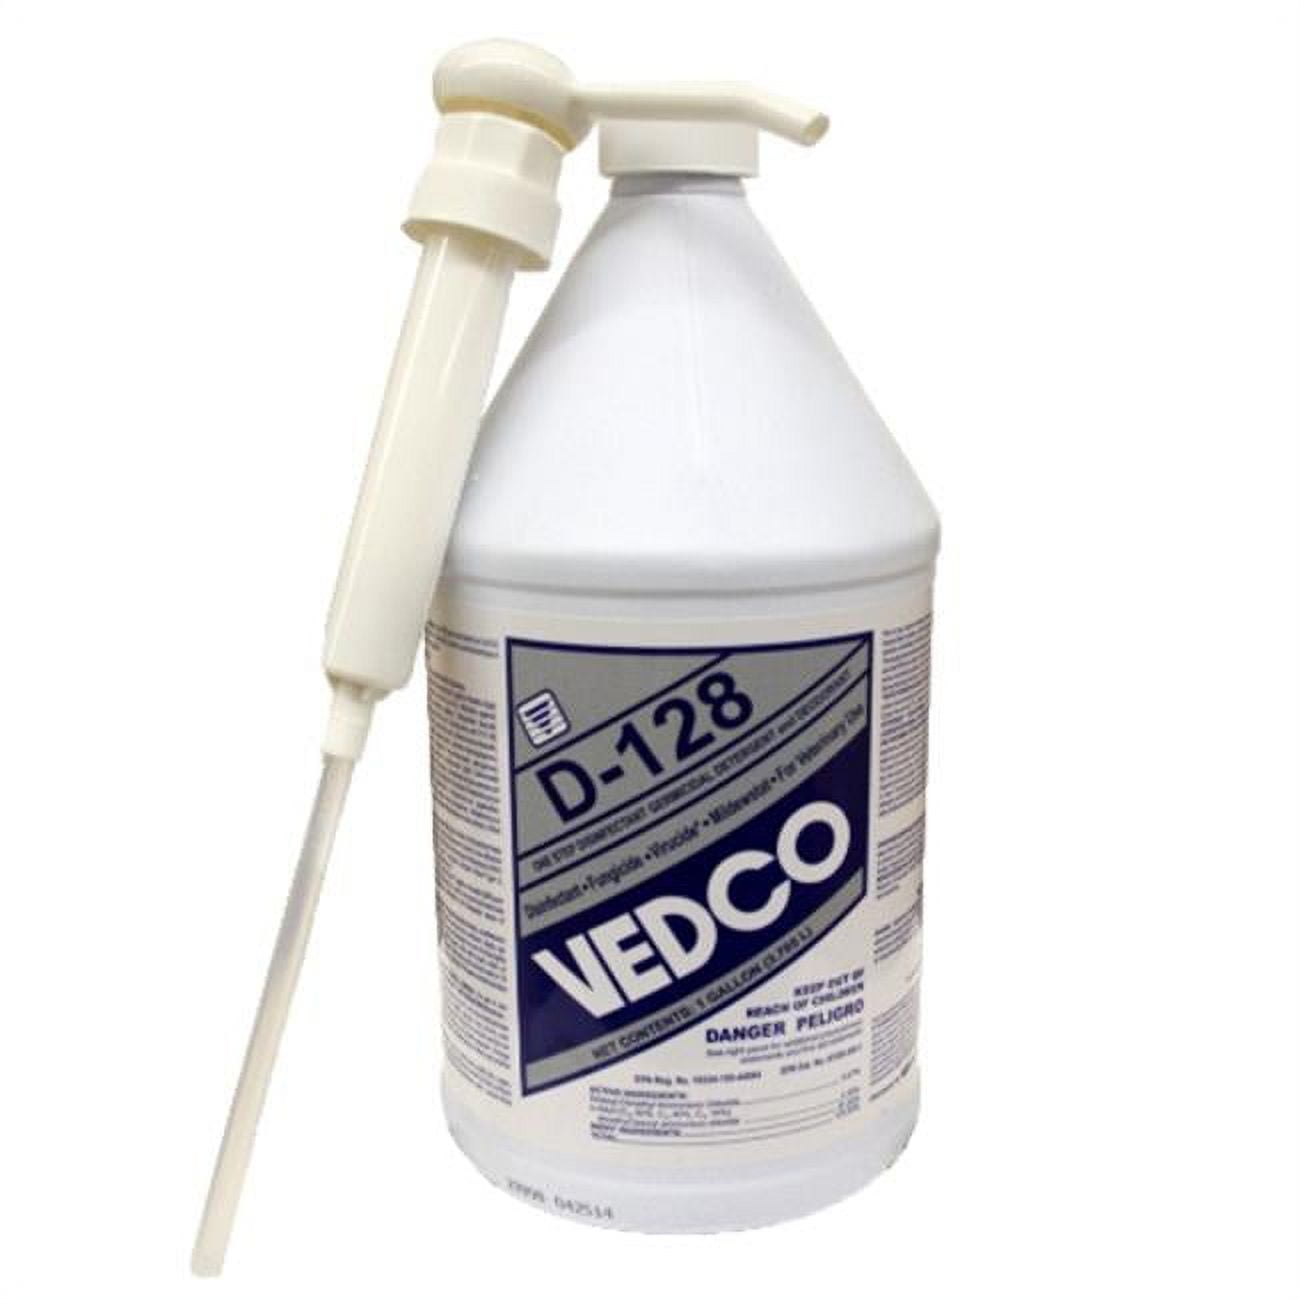 NAMICO 266 Disinfectant Cleaners